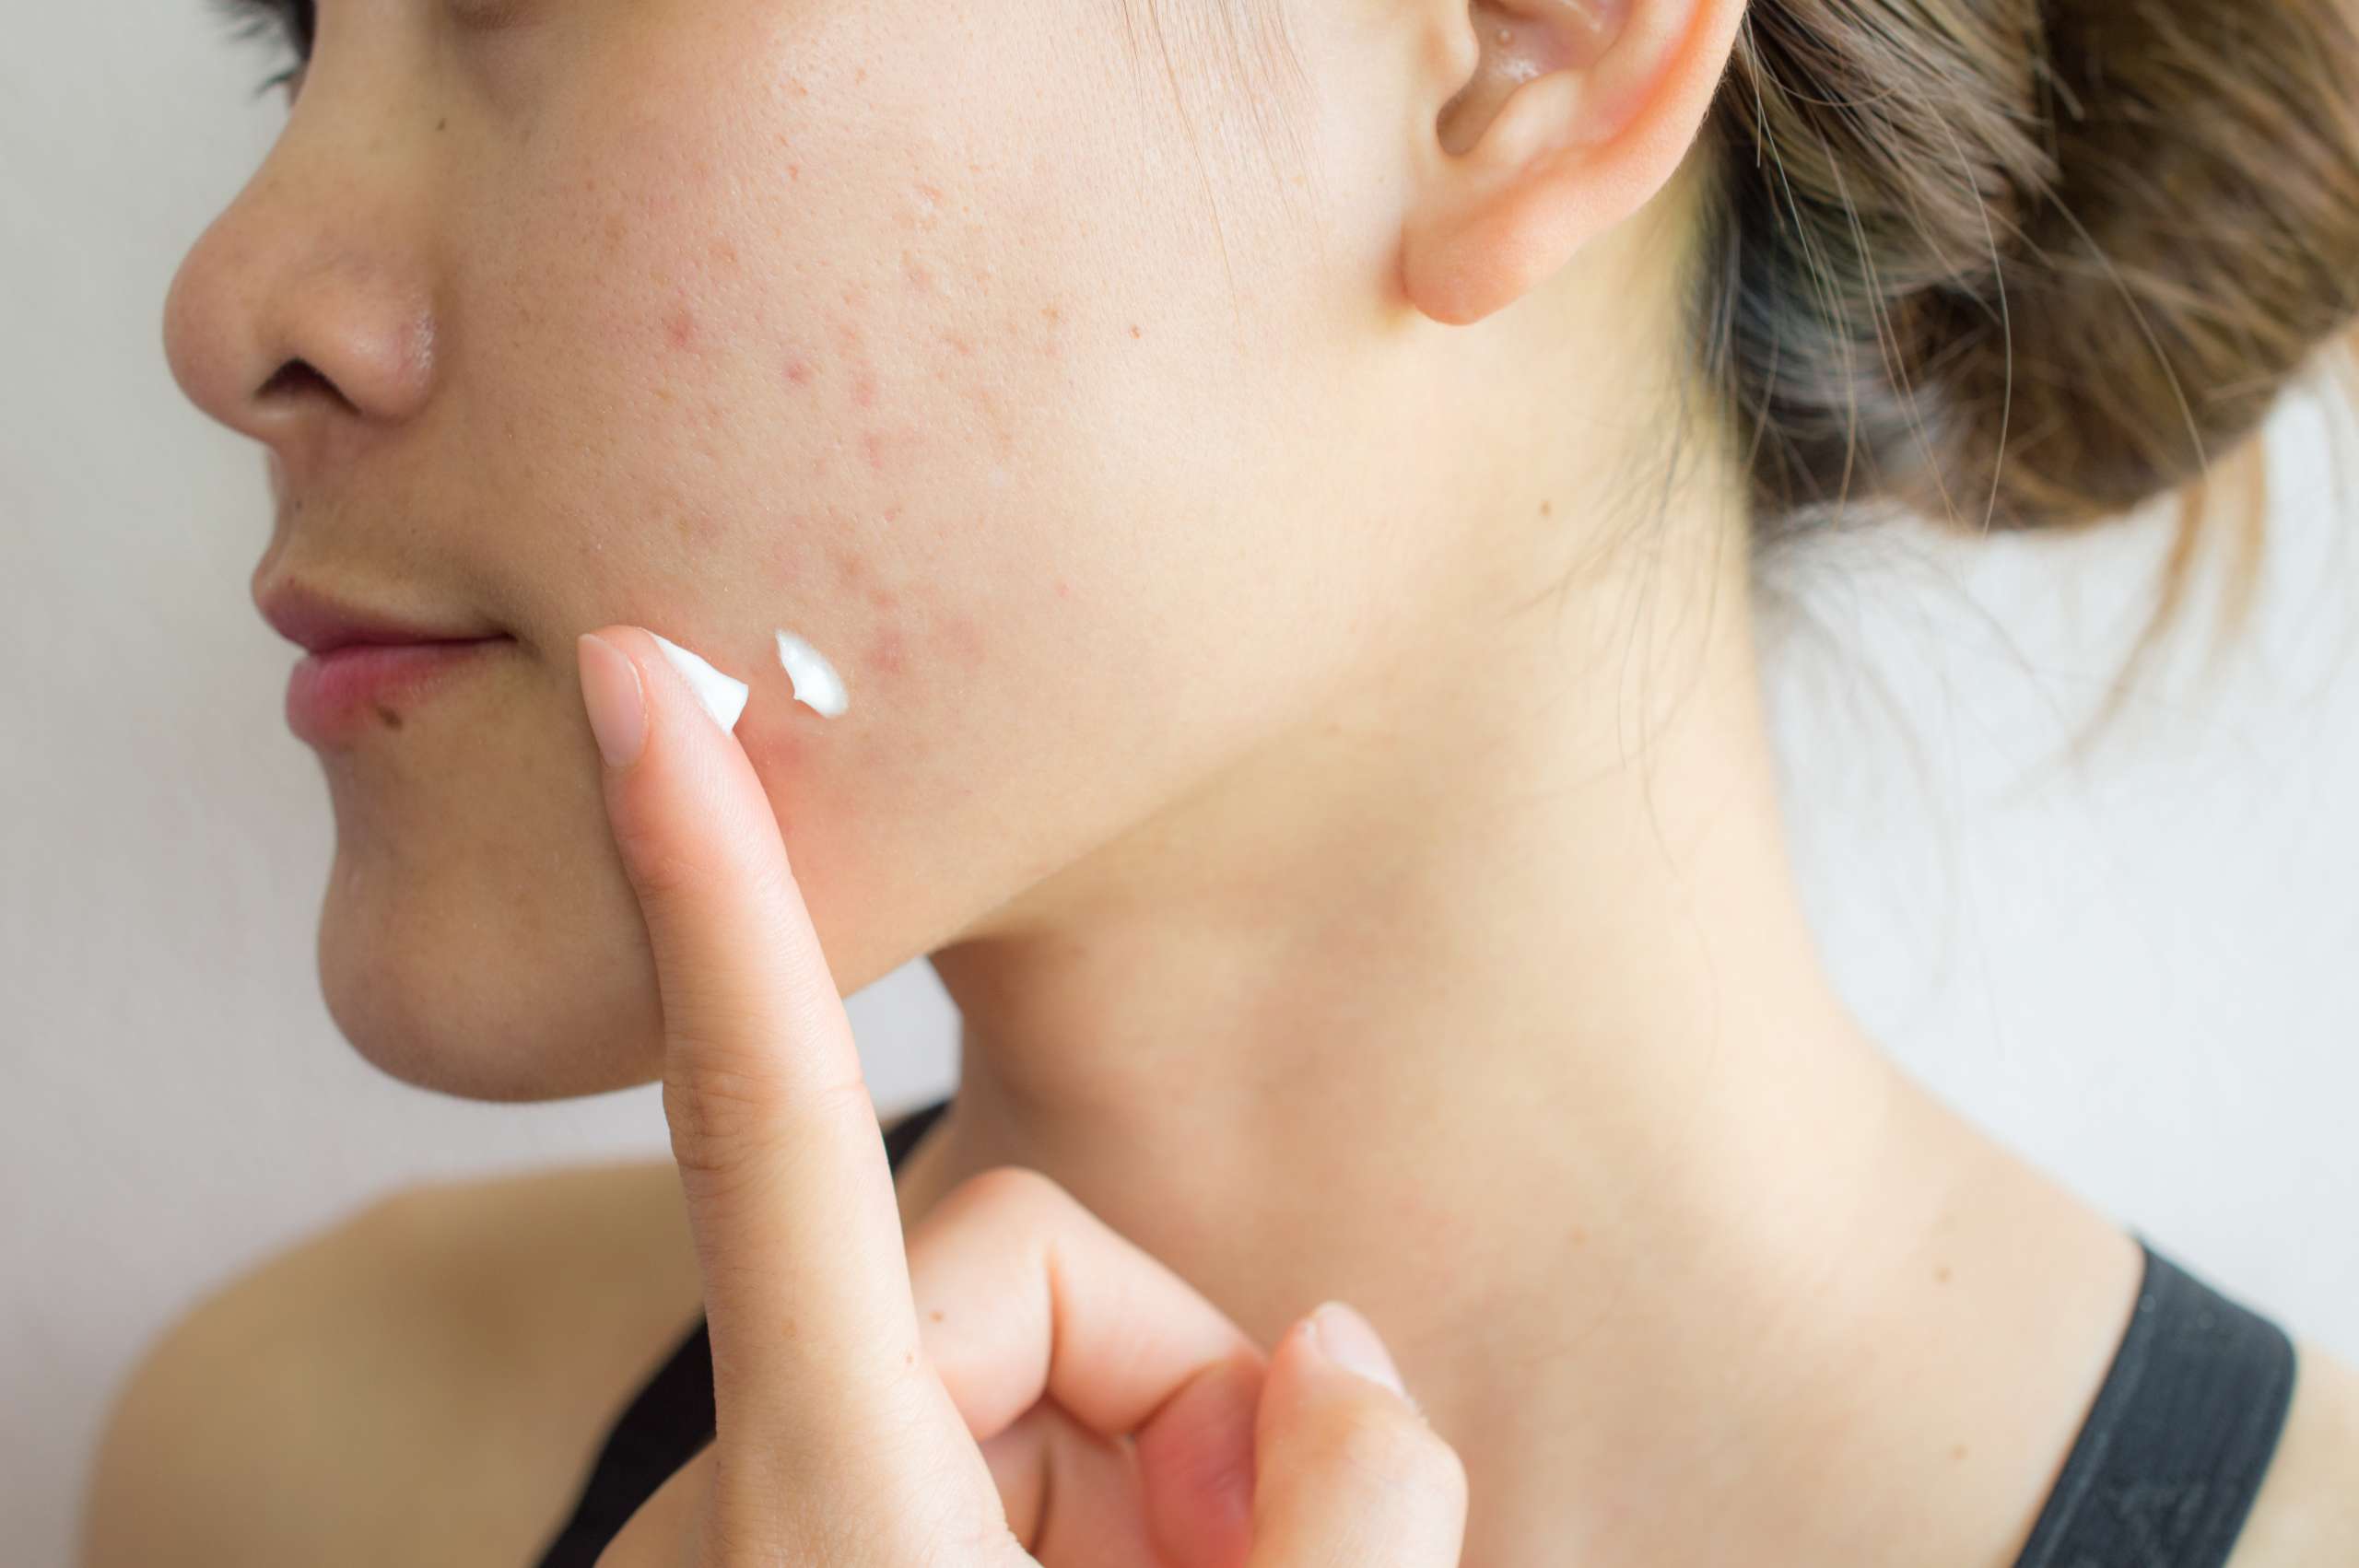 Portrait of young Asian woman having acne problem. Applying acne cream on her face- Skin Conditions Before Pregnancy